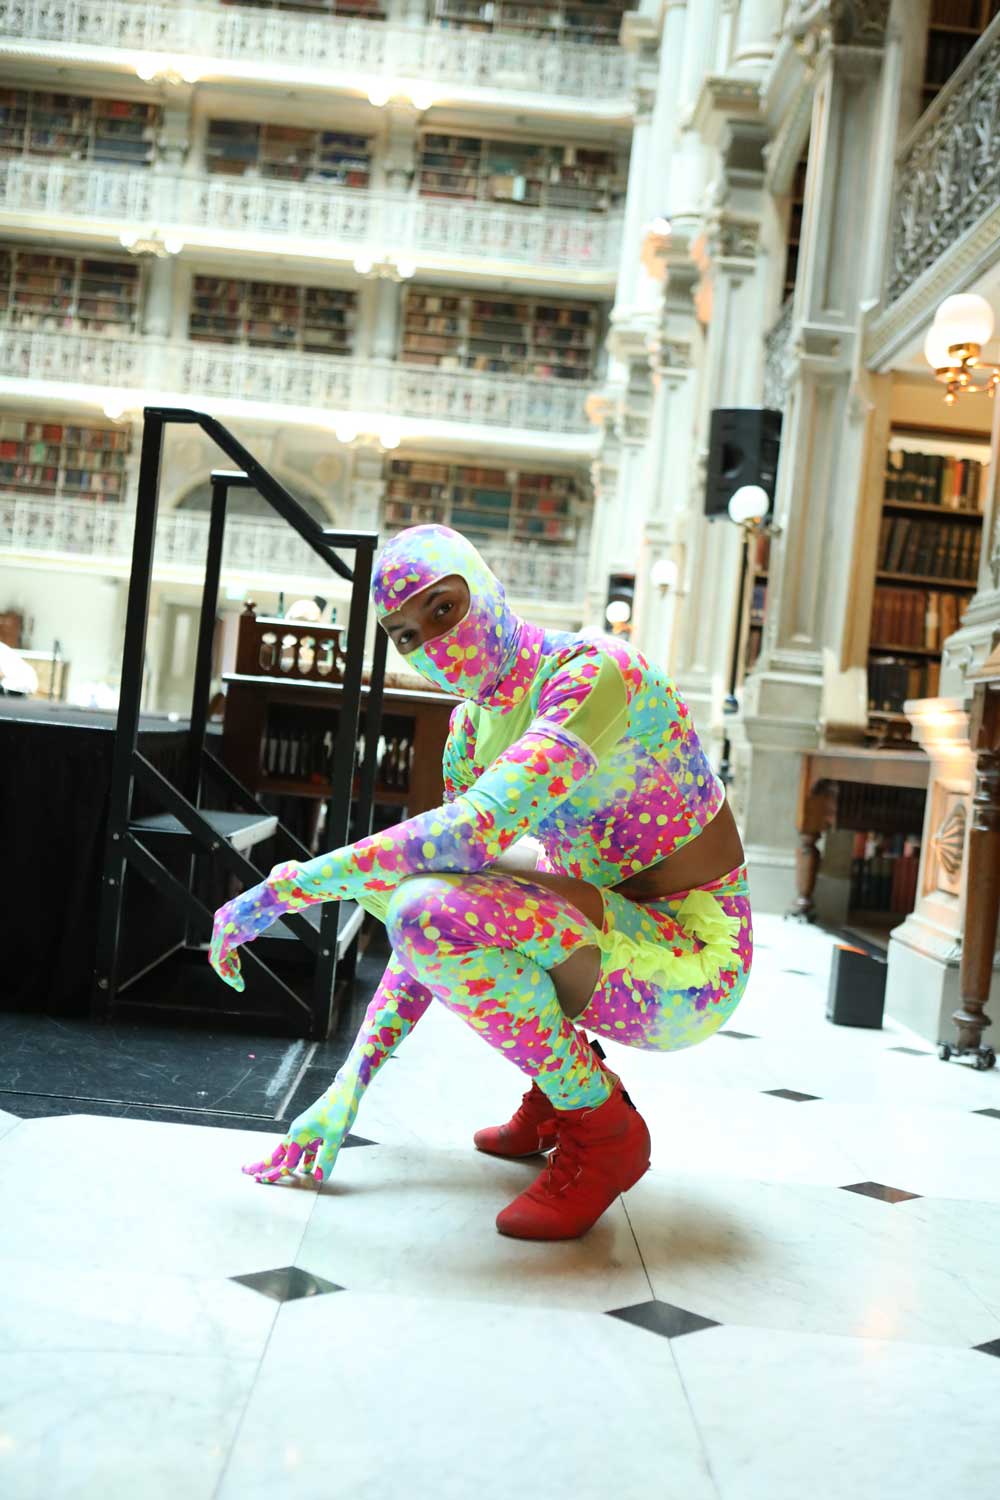 A person crouches near the stage at the George Peabody Library